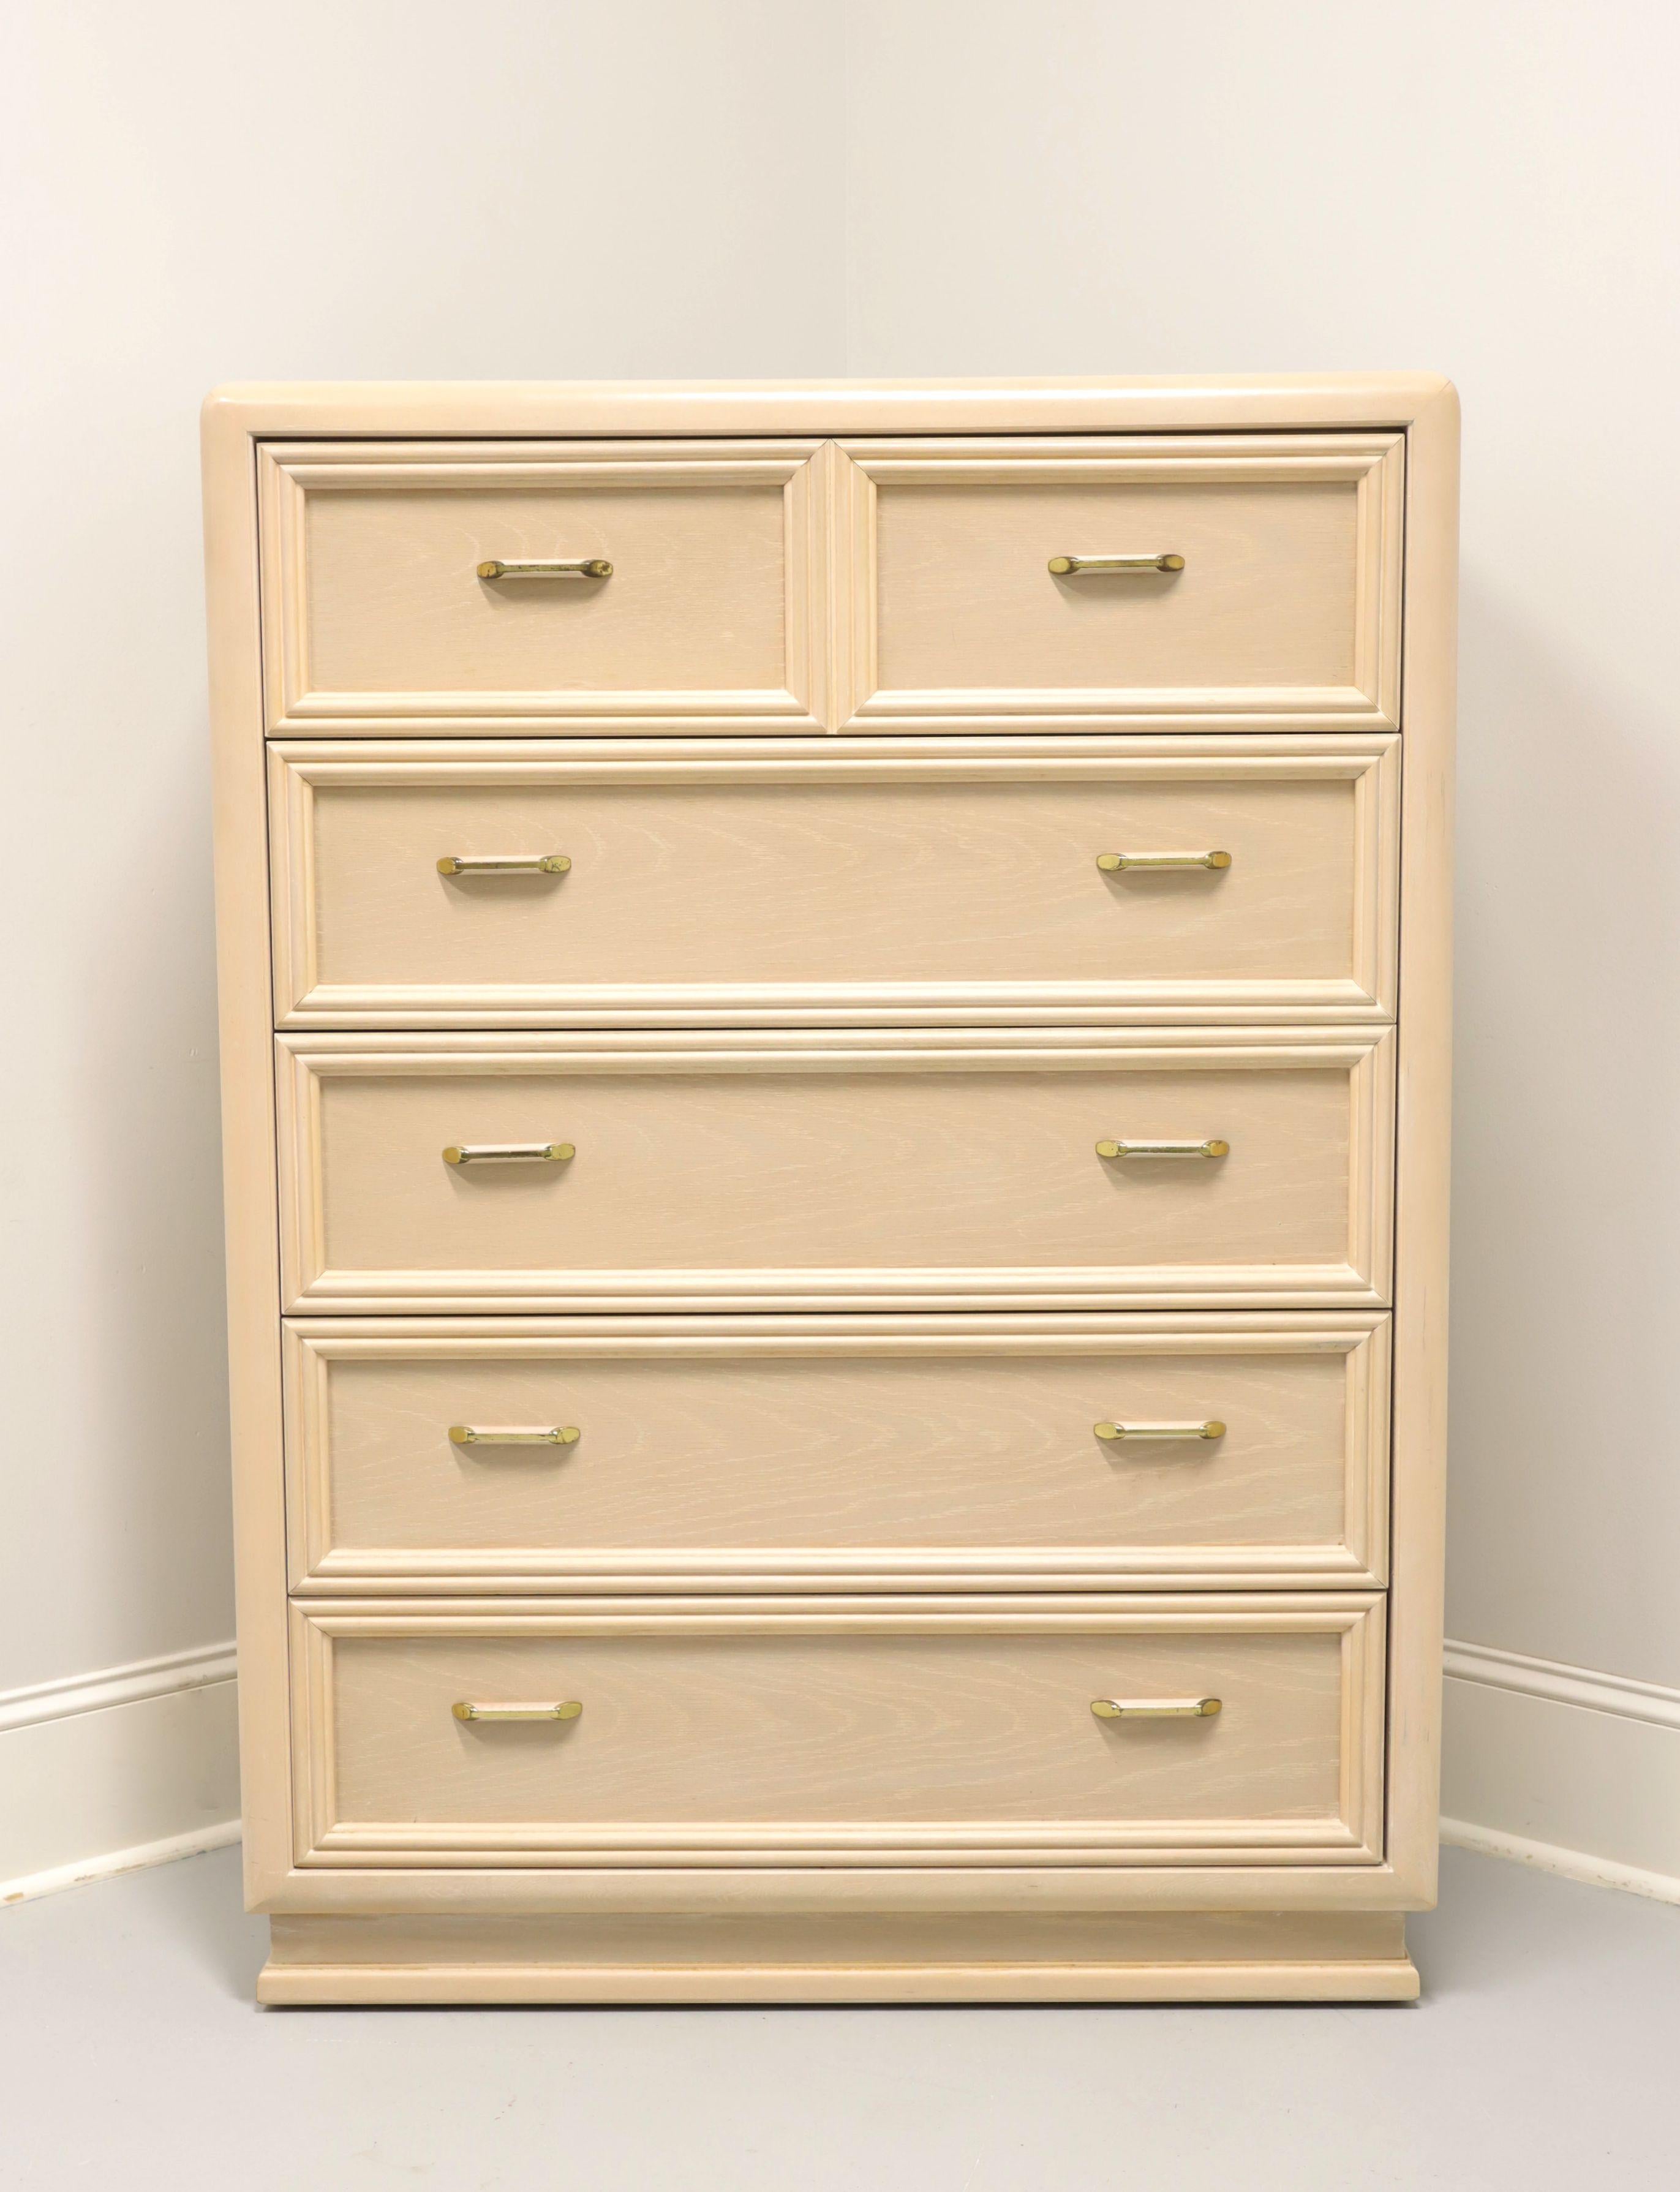 A Post-Modern style chest of drawers by Thomasville. Oak with a whitewashed finish, brass & wood hardware, waterfall edges, and a solid base. Features five drawers of dovetail construction. Made in North Carolina, USA, in the late 20th